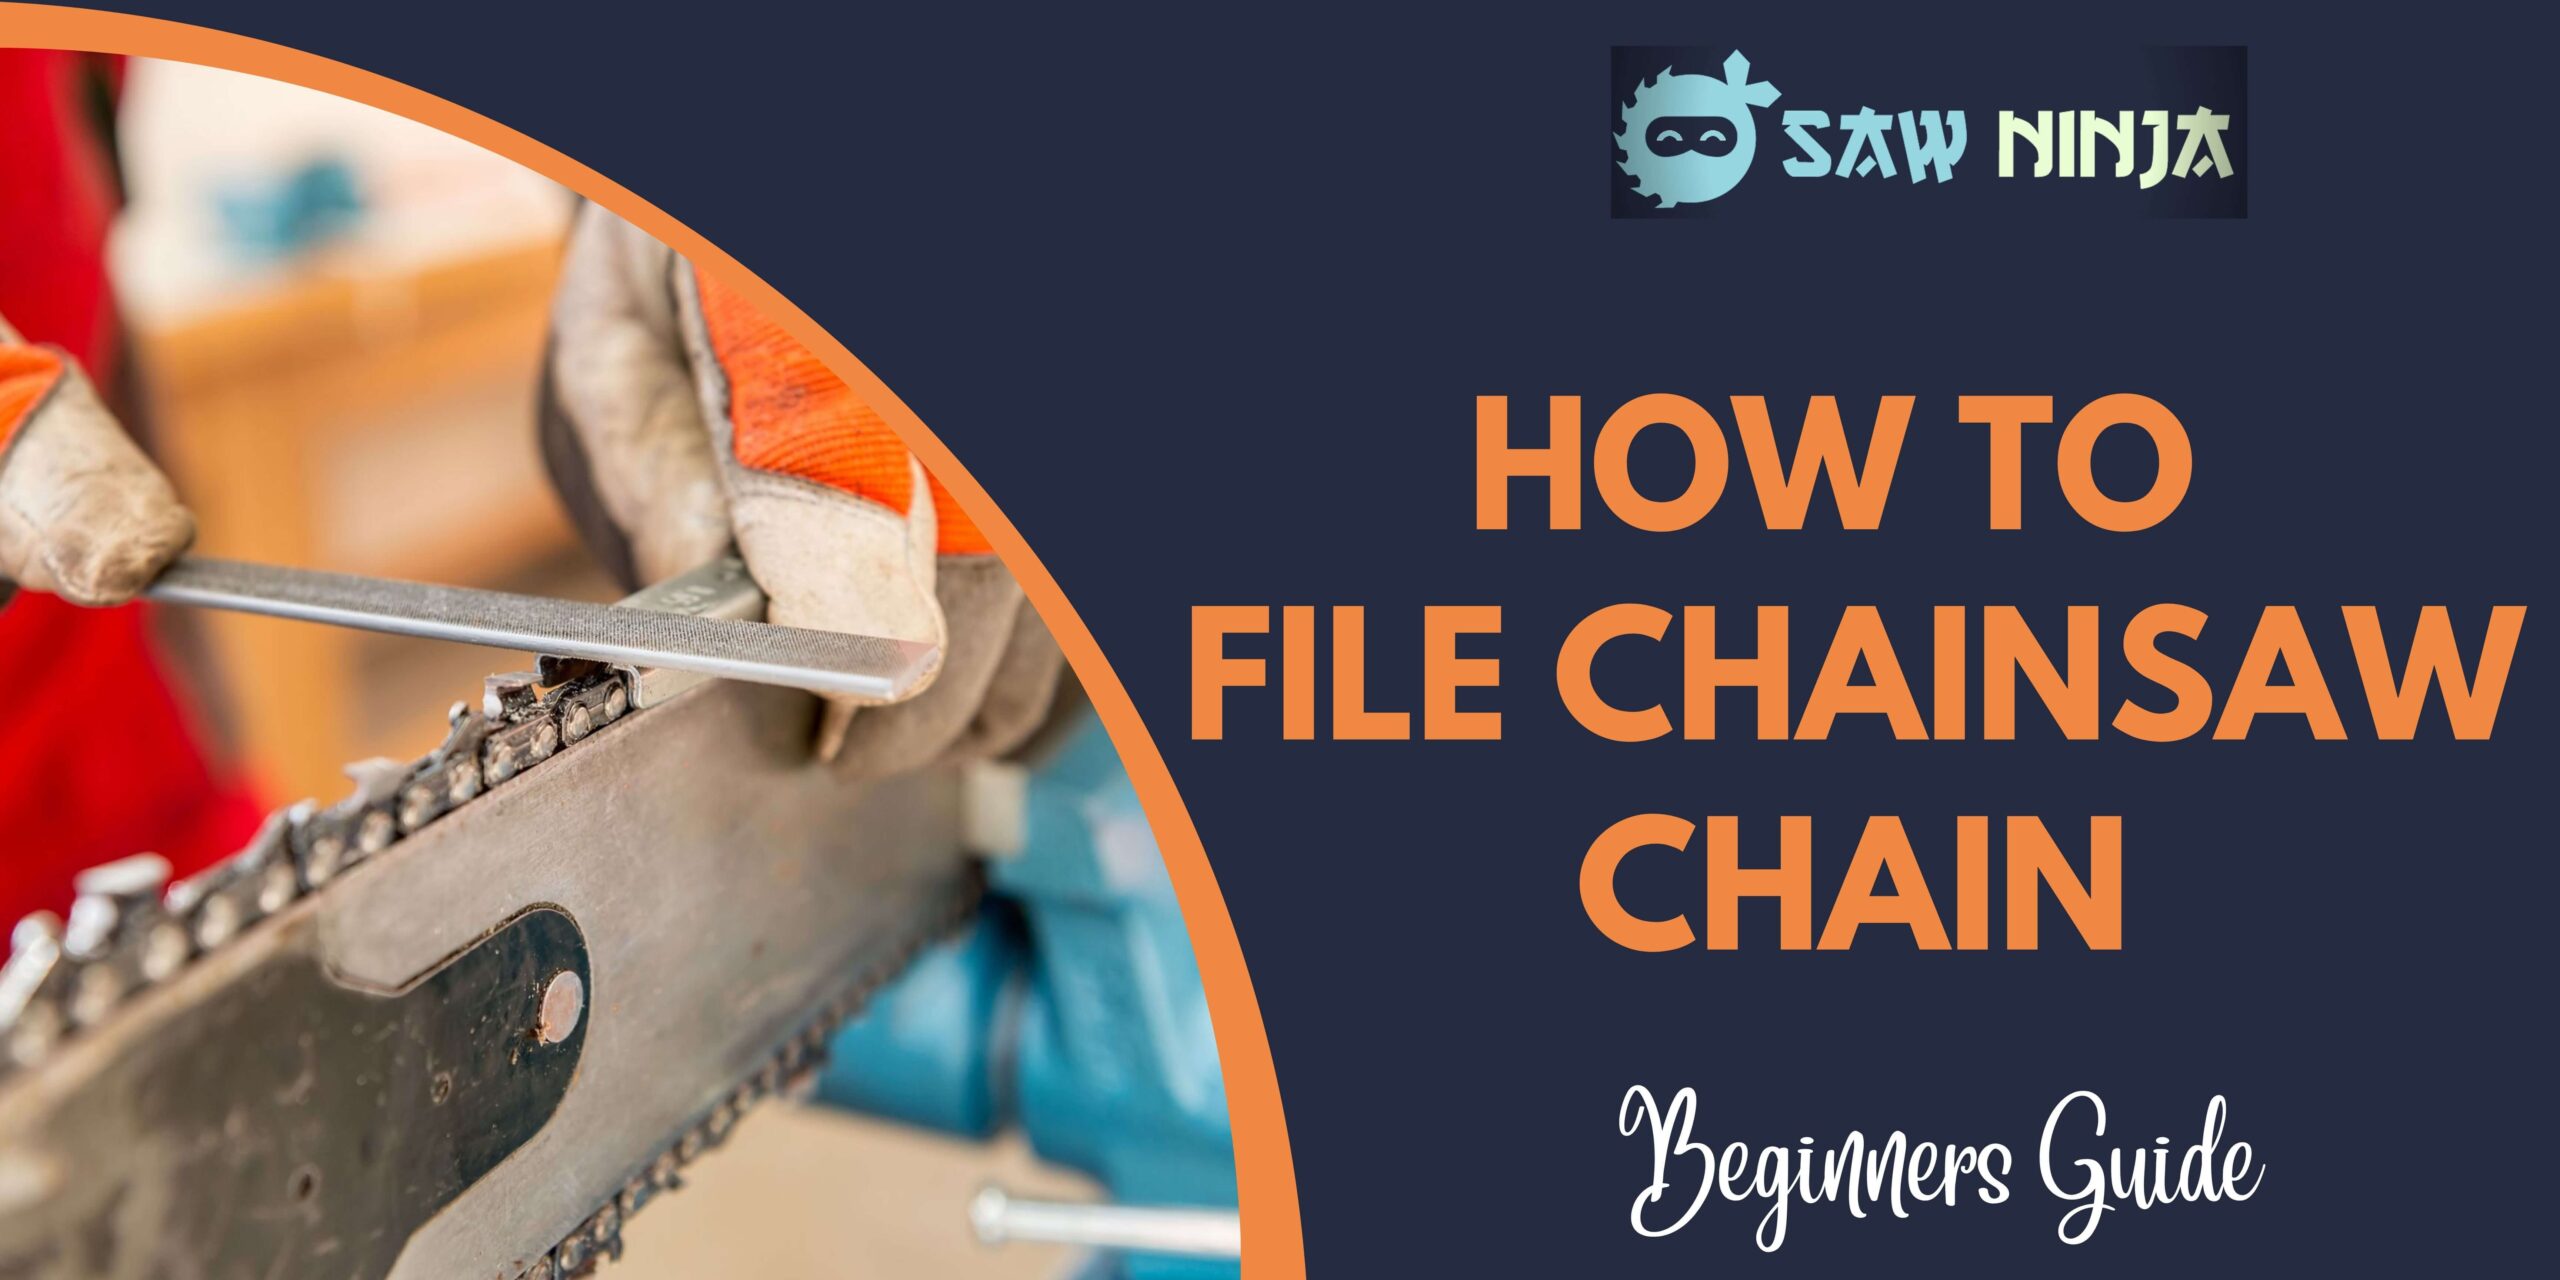 How To File Chainsaw Chain